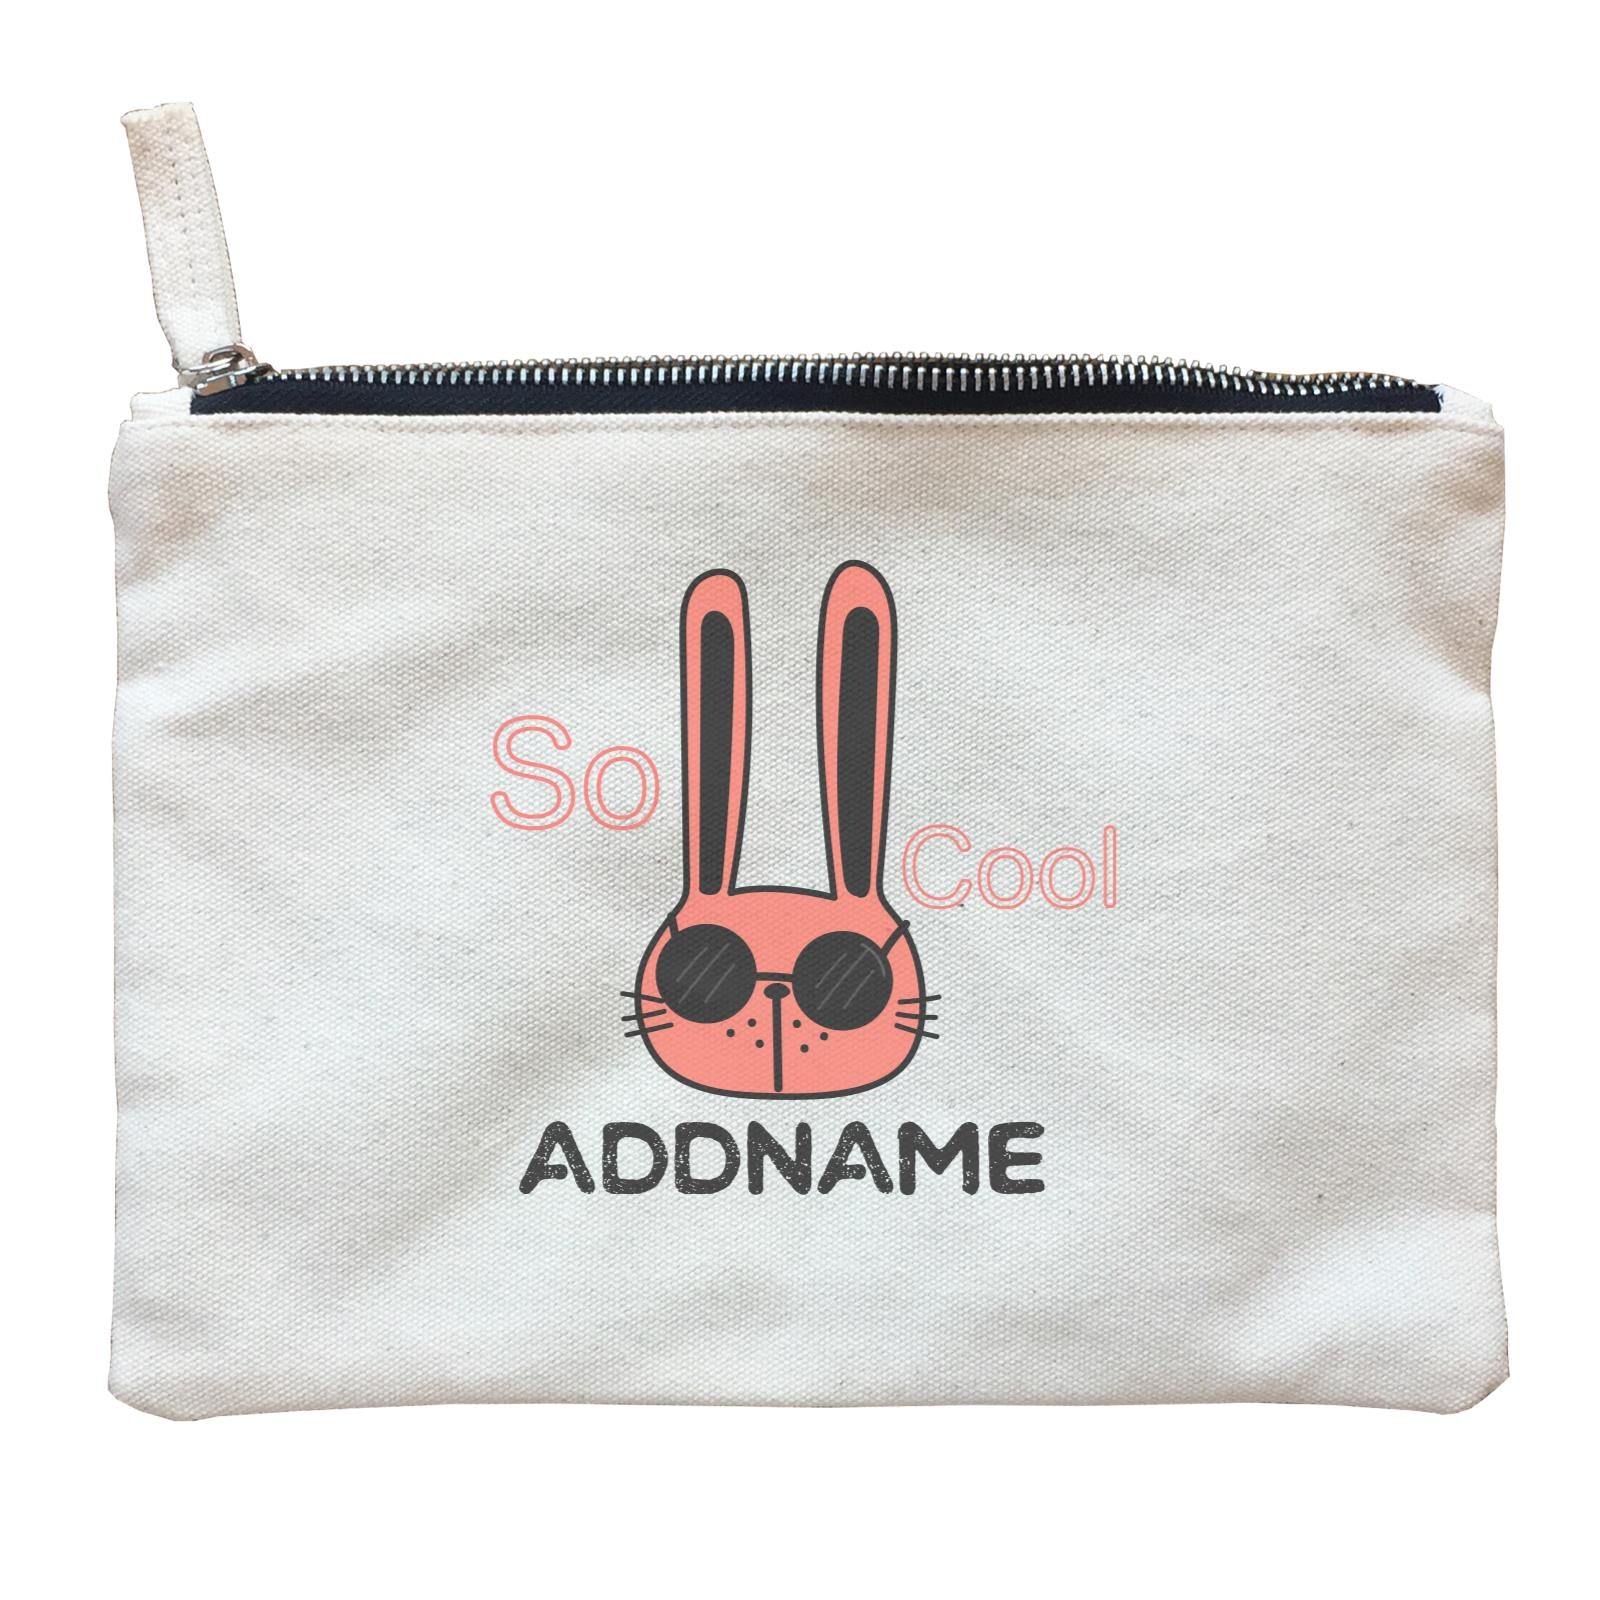 Cute Animals And Friends Series Cool Bunny With Sunglasses Addname Zipper Pouch